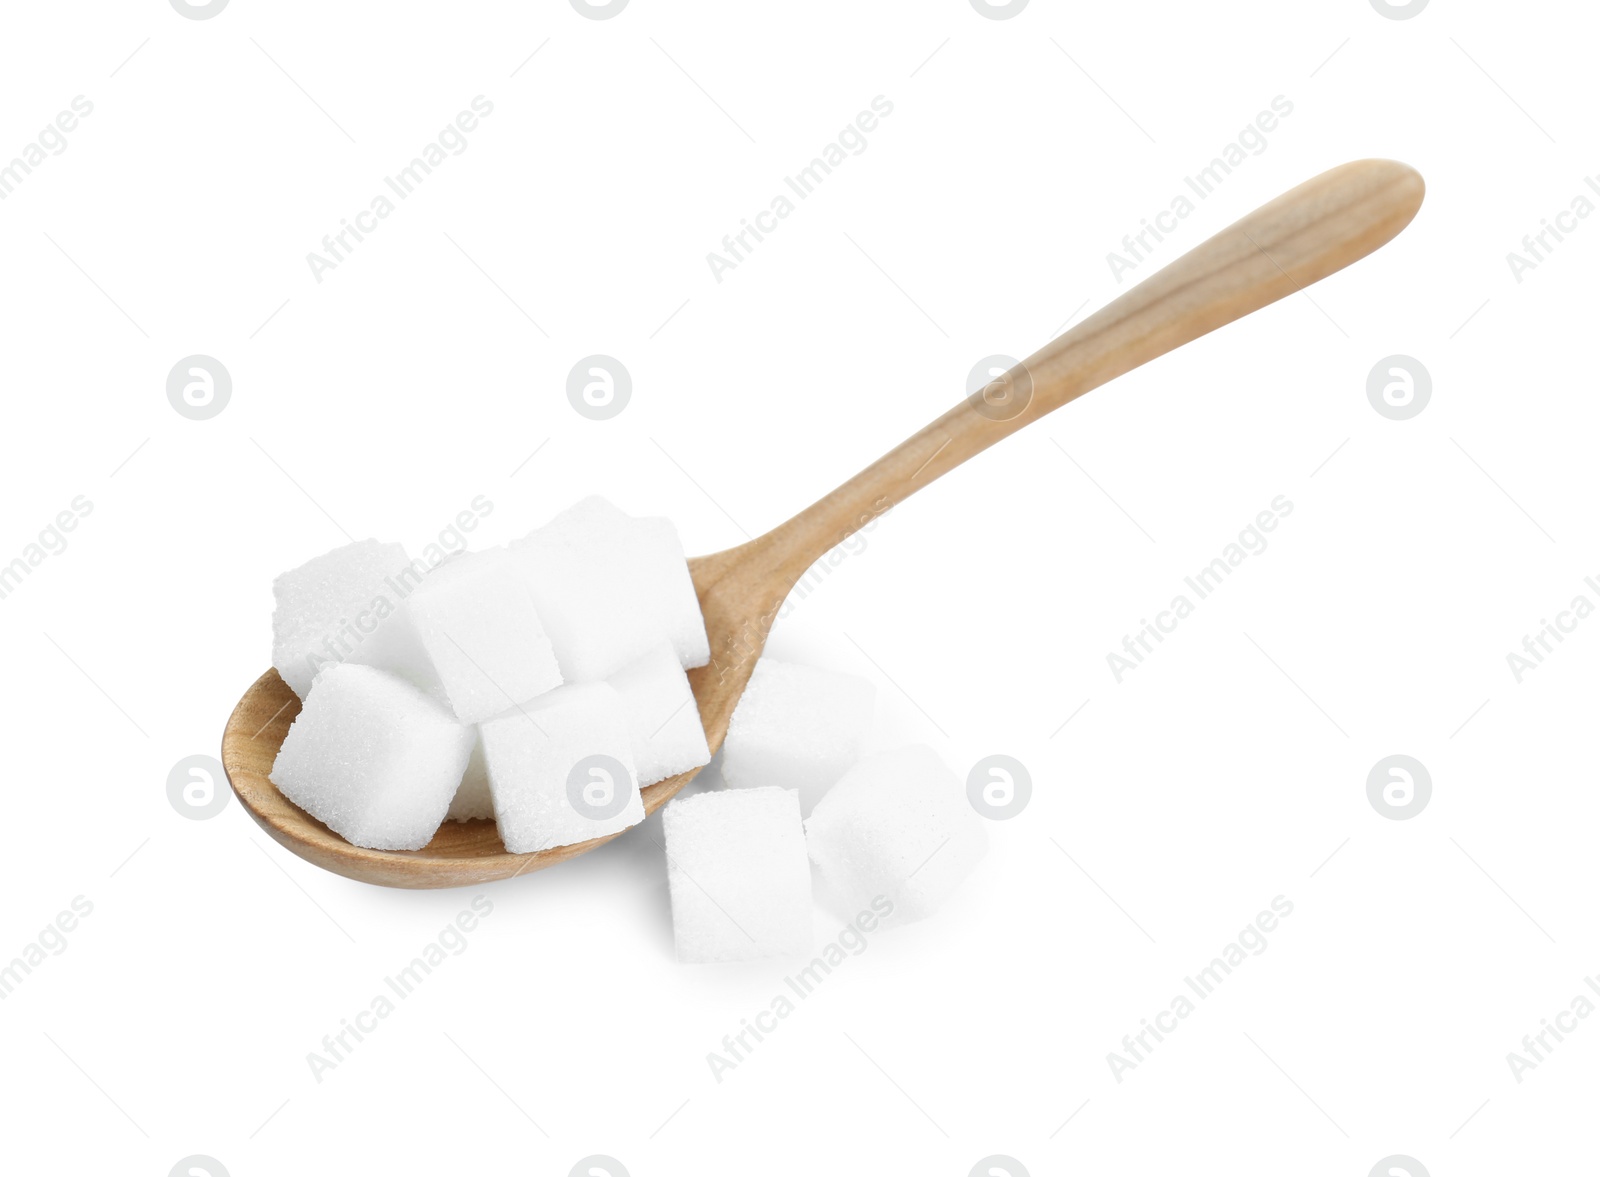 Photo of Sugar cubes and wooden spoon isolated on white